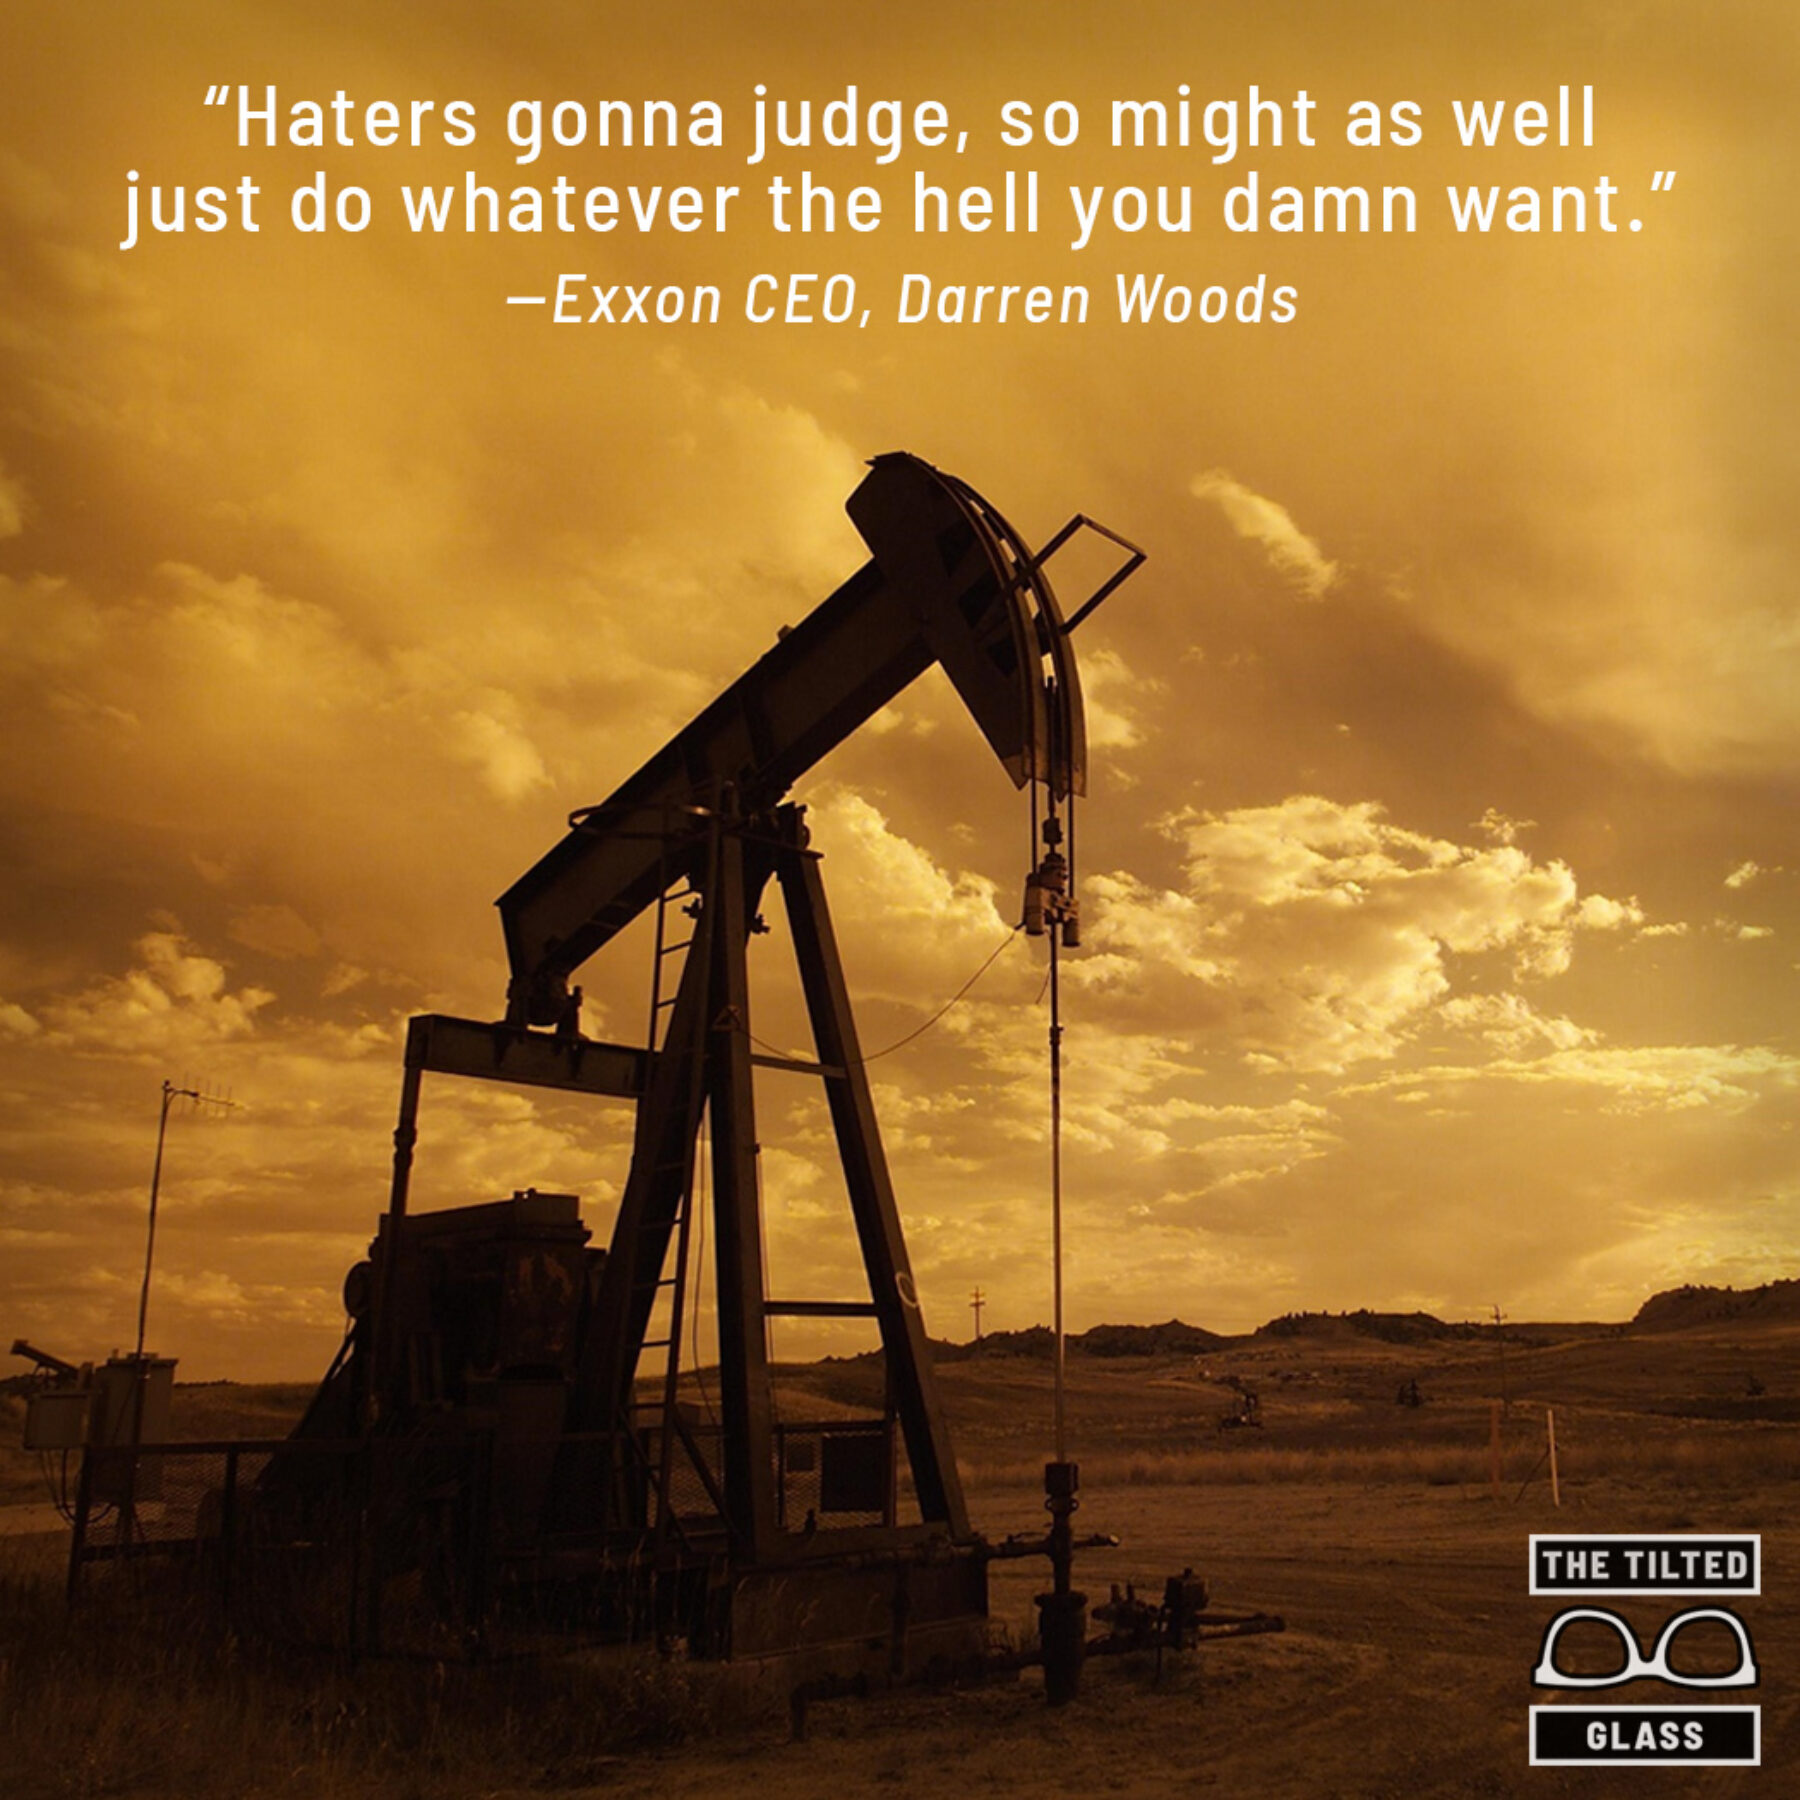 Exxon: Haters Gonna Judge Anyway